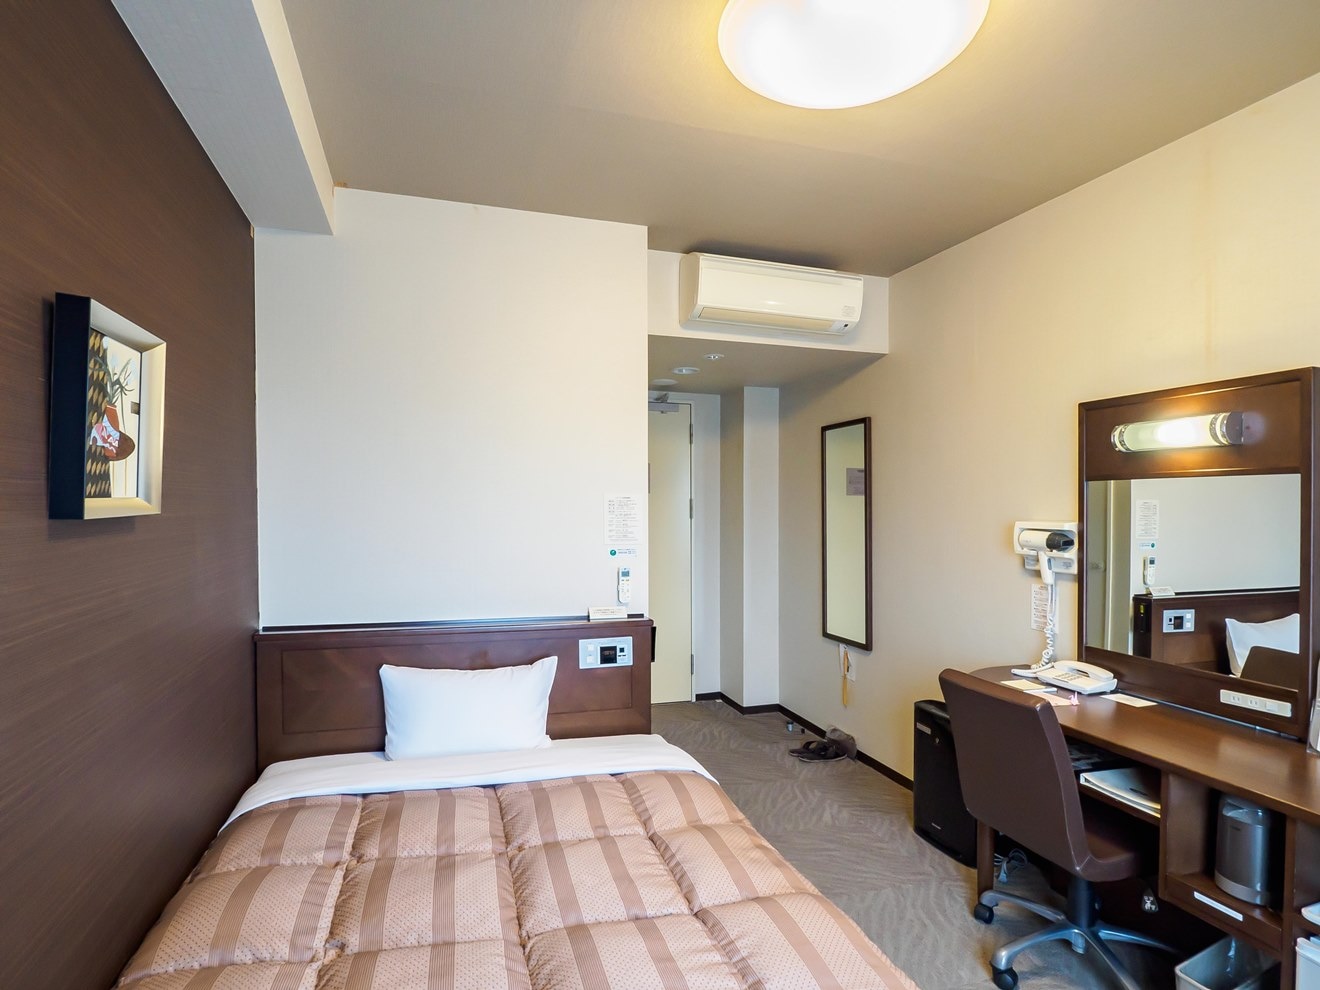  ■ Standard single room ■ Bright, simple, clean and calm atmosphere